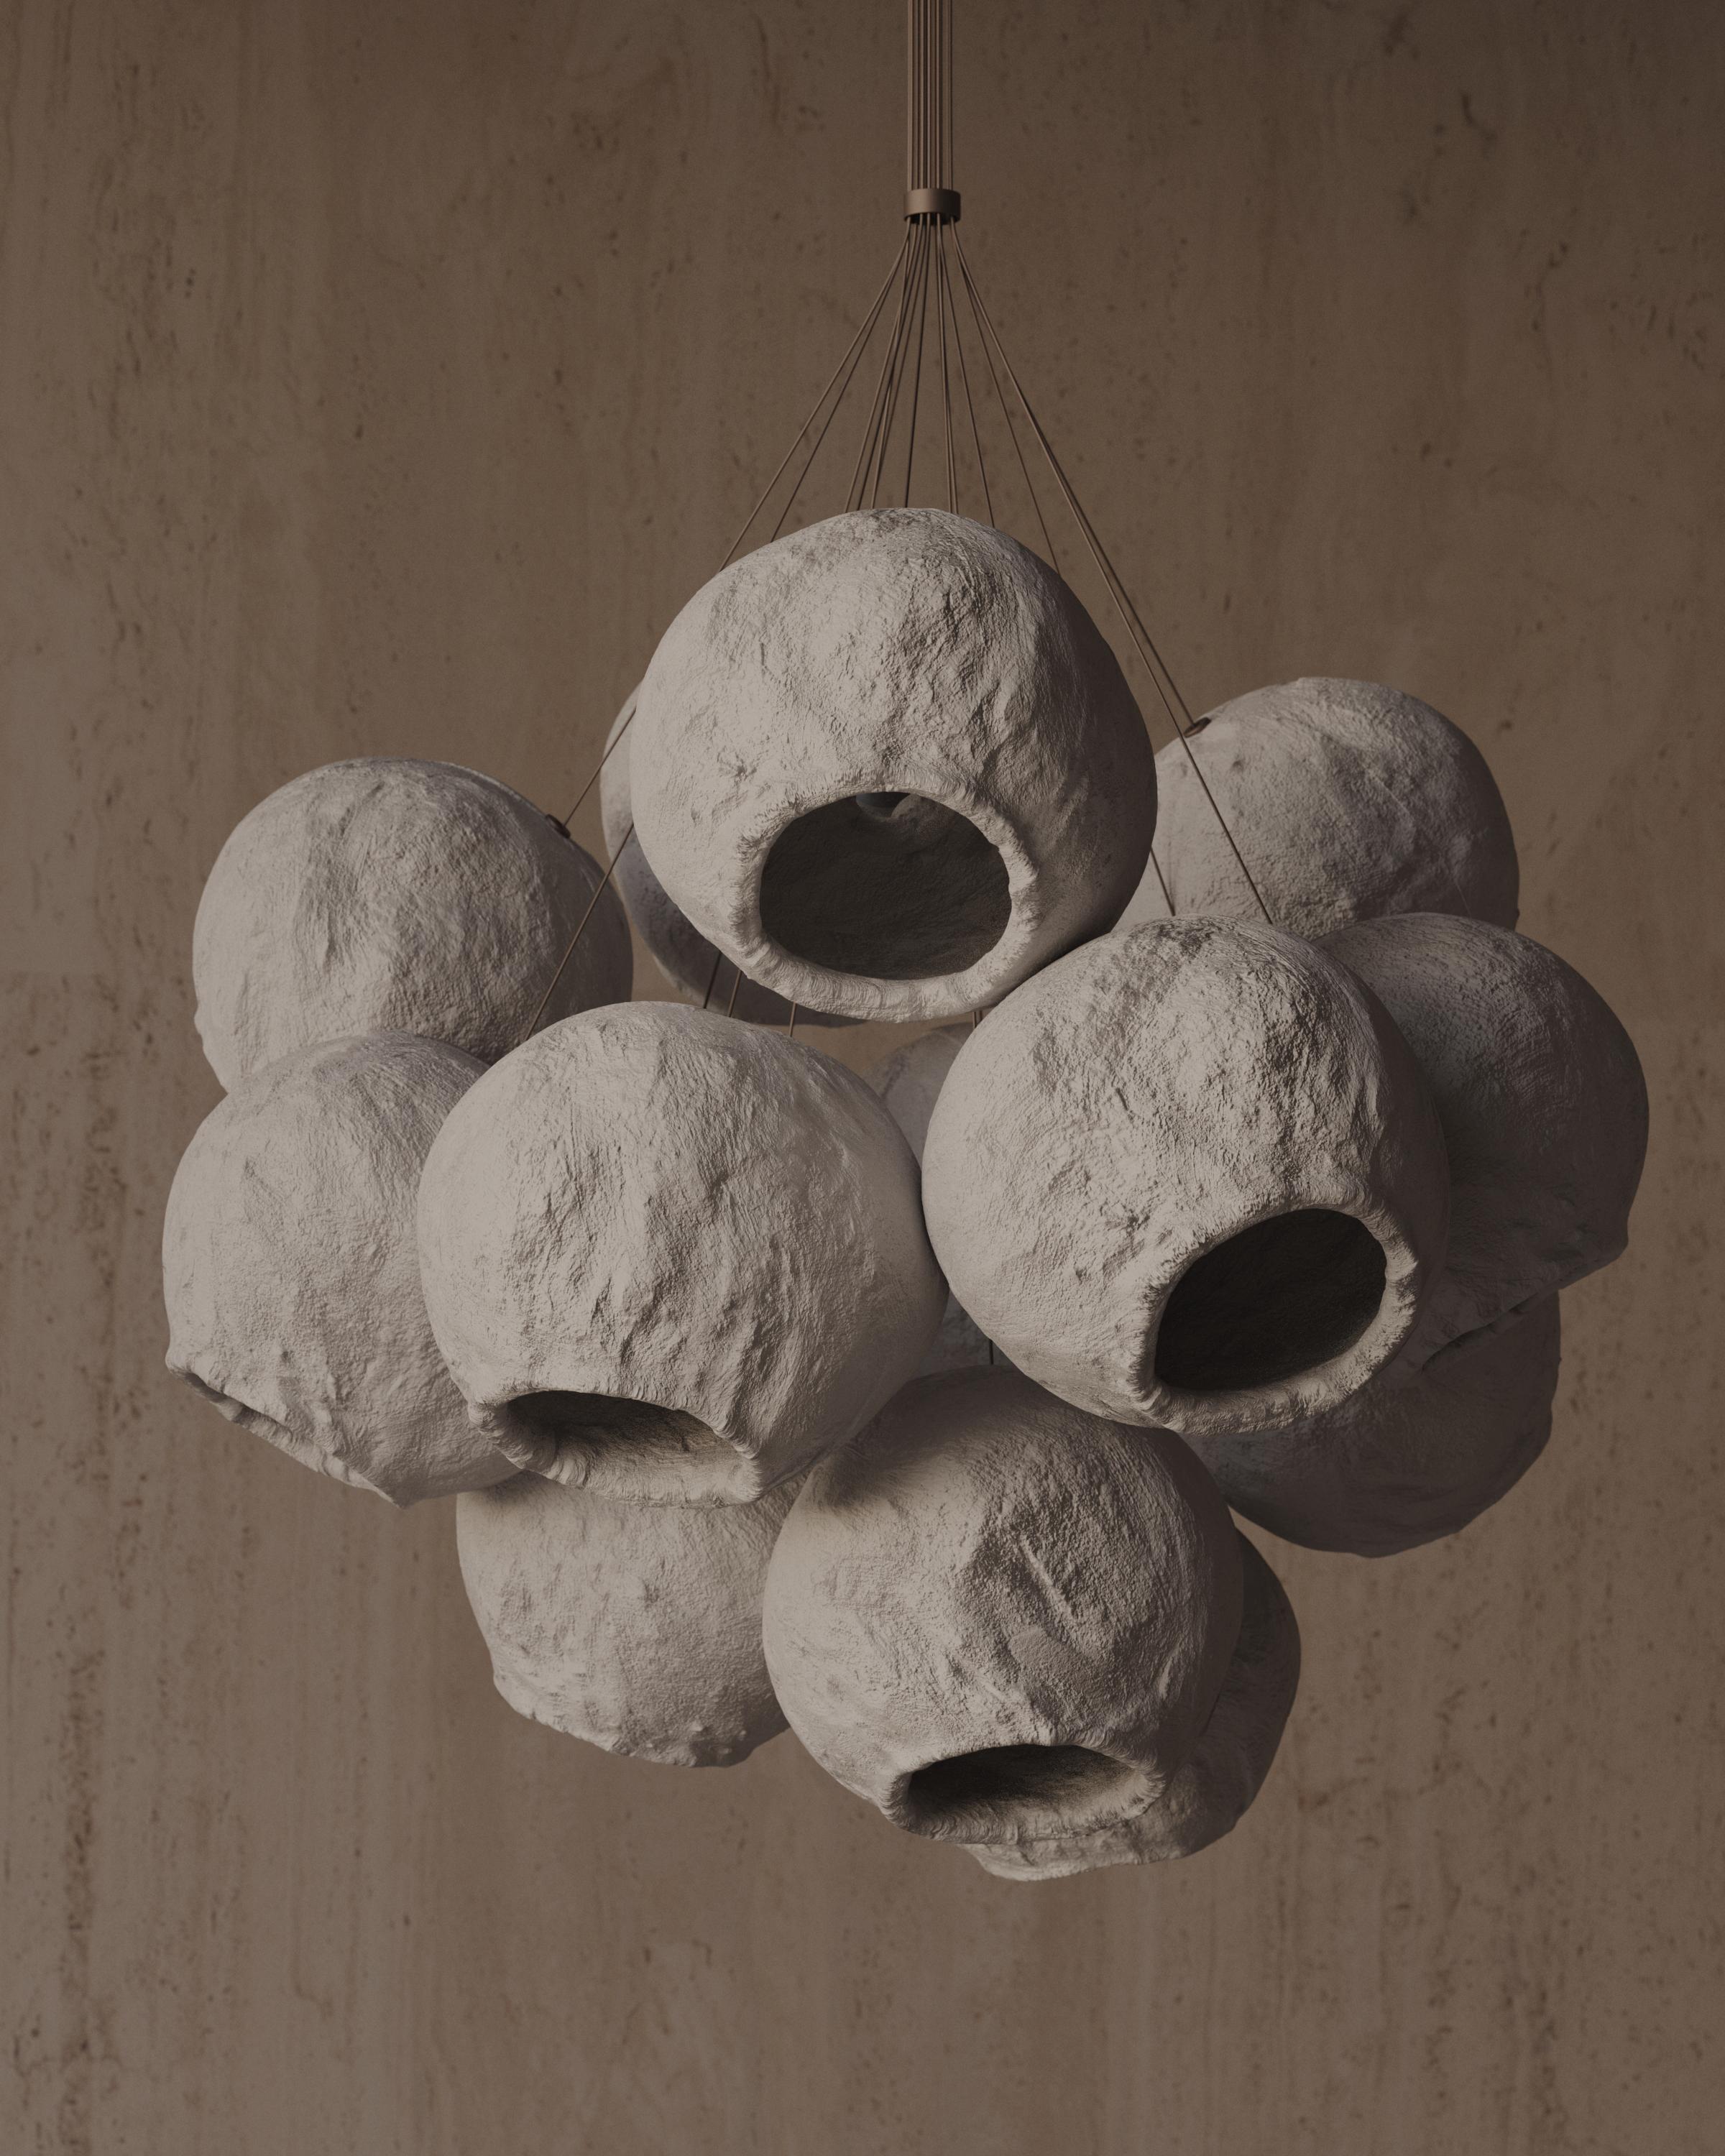 Is a tribute to Ukrainian aesthetics. More than ten individual
ceramic shining spheres are assembled into a delicious cluster that
radiates light in all directions, thus creating a sophisticated lighting
design. The name translates as 